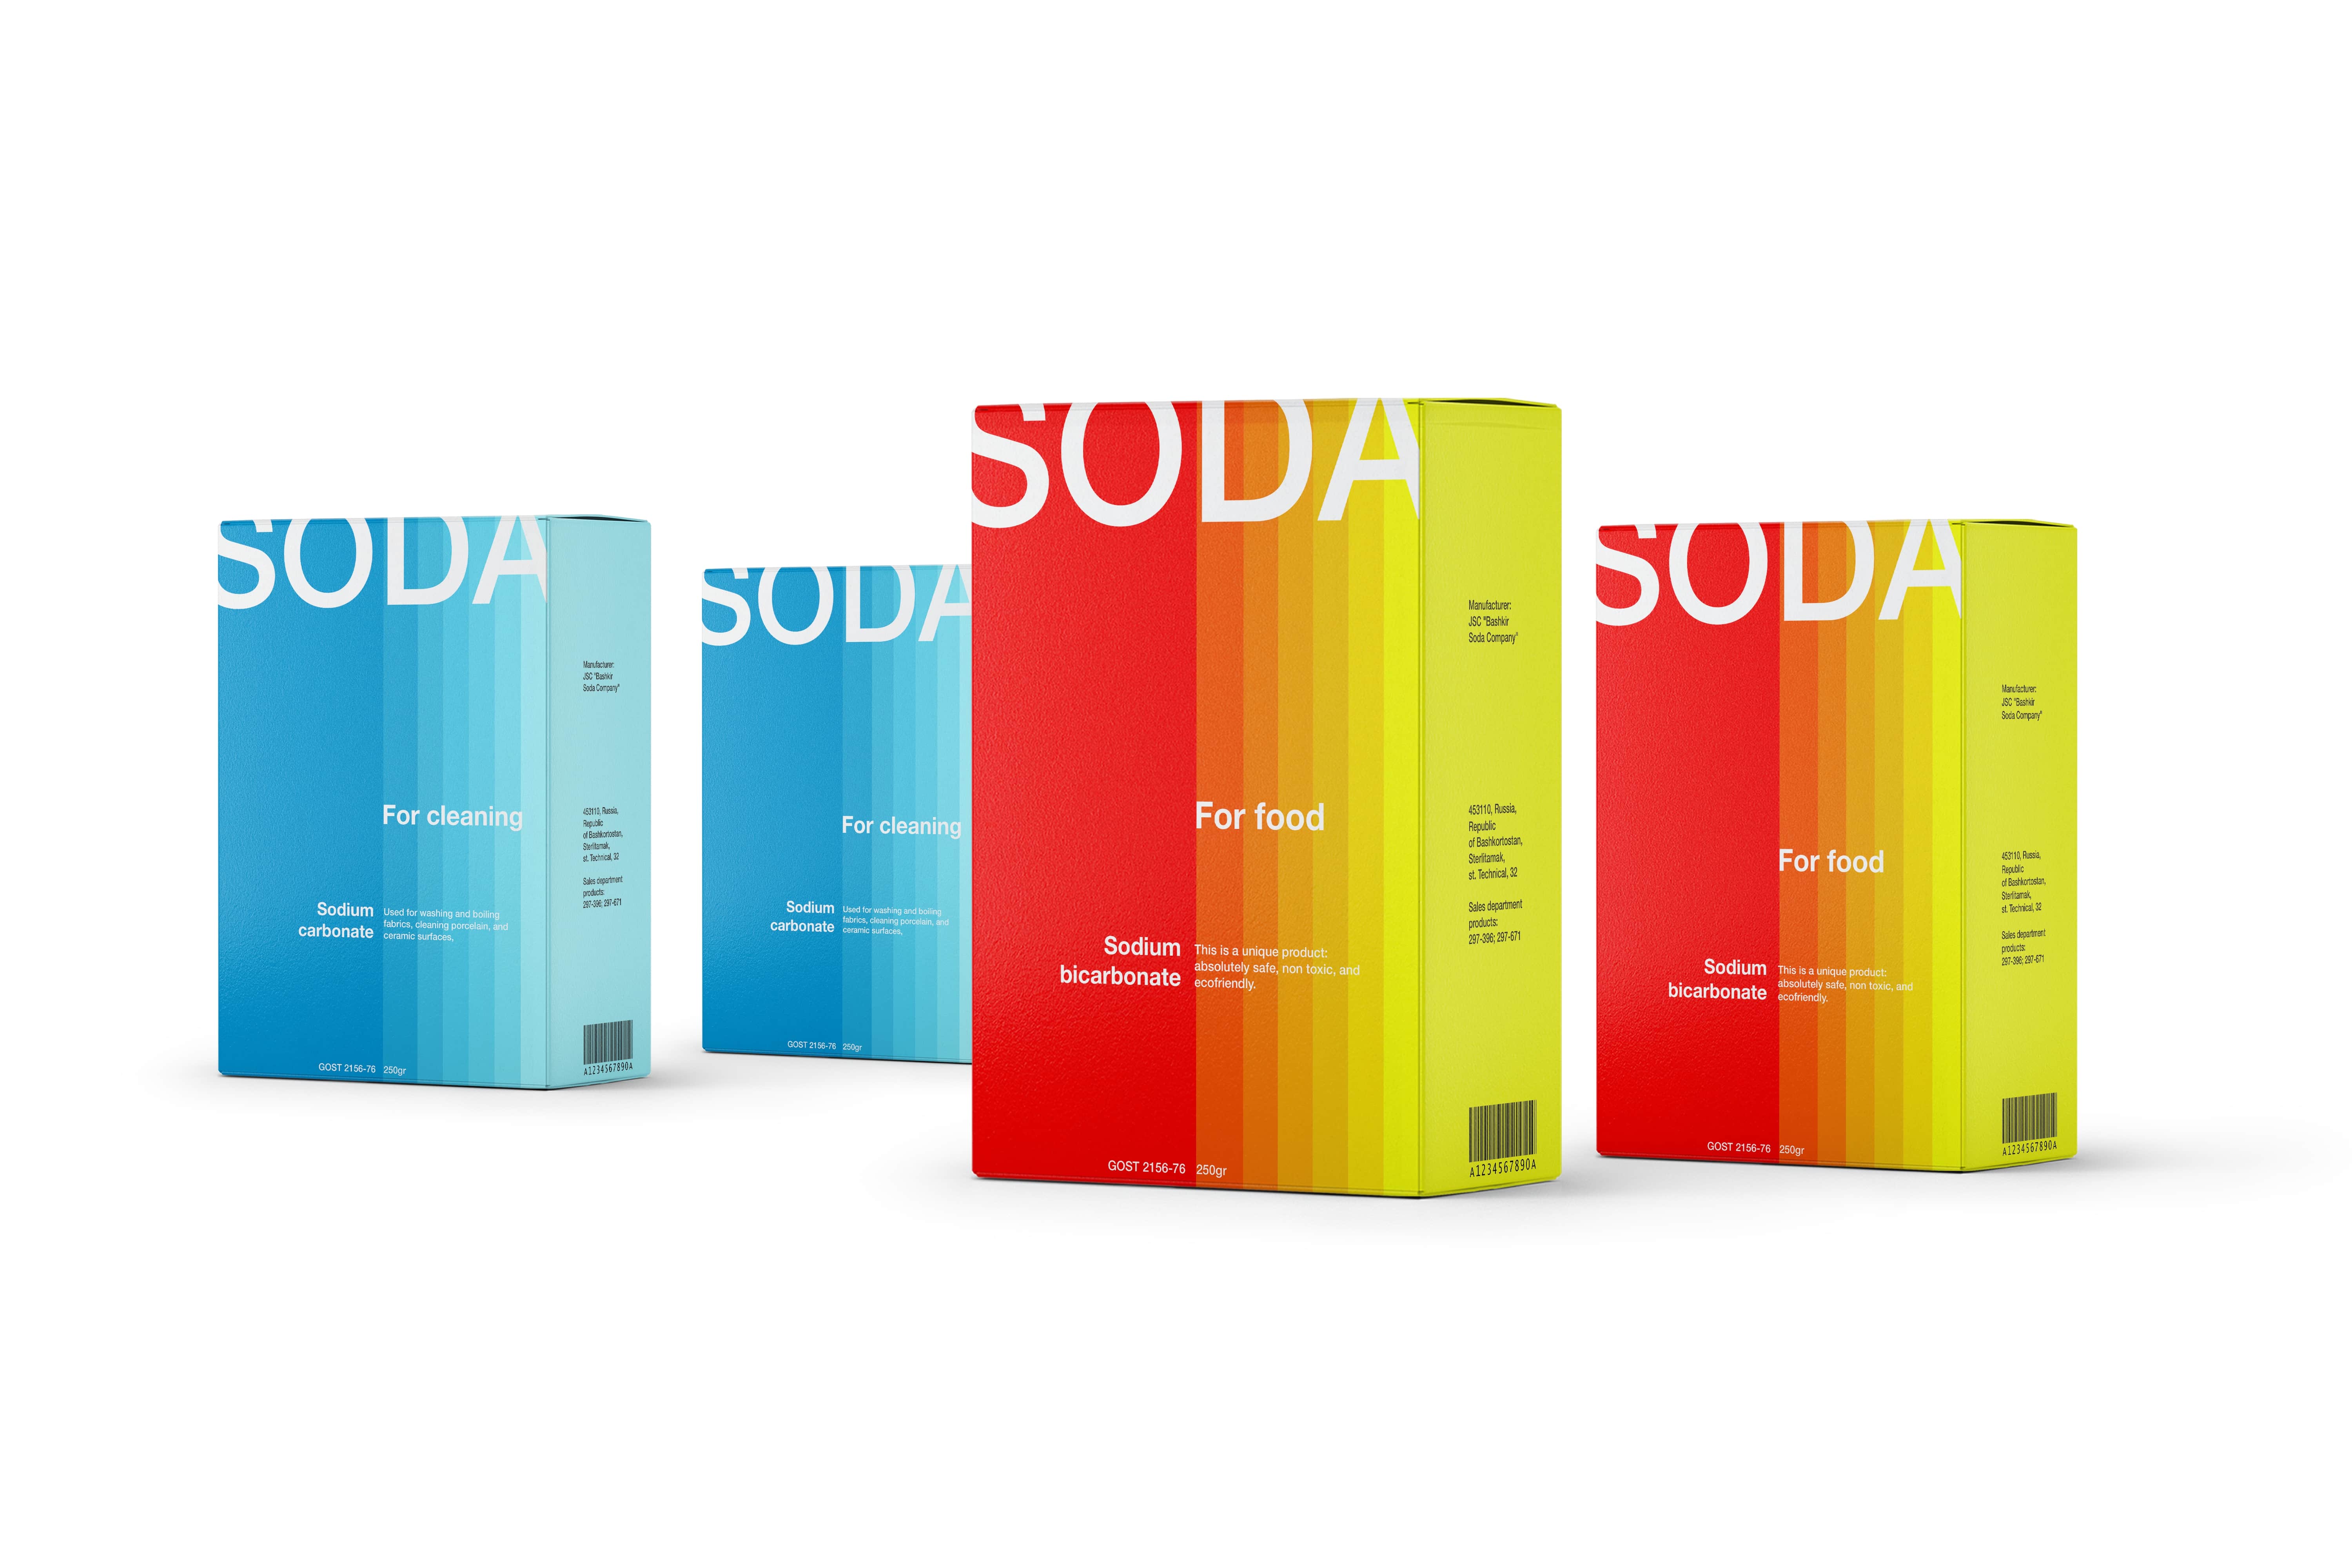 Concept Swiss Style Packaging Design for Traditional SODA (sodium) Boxes by Student Edgar Muradovi